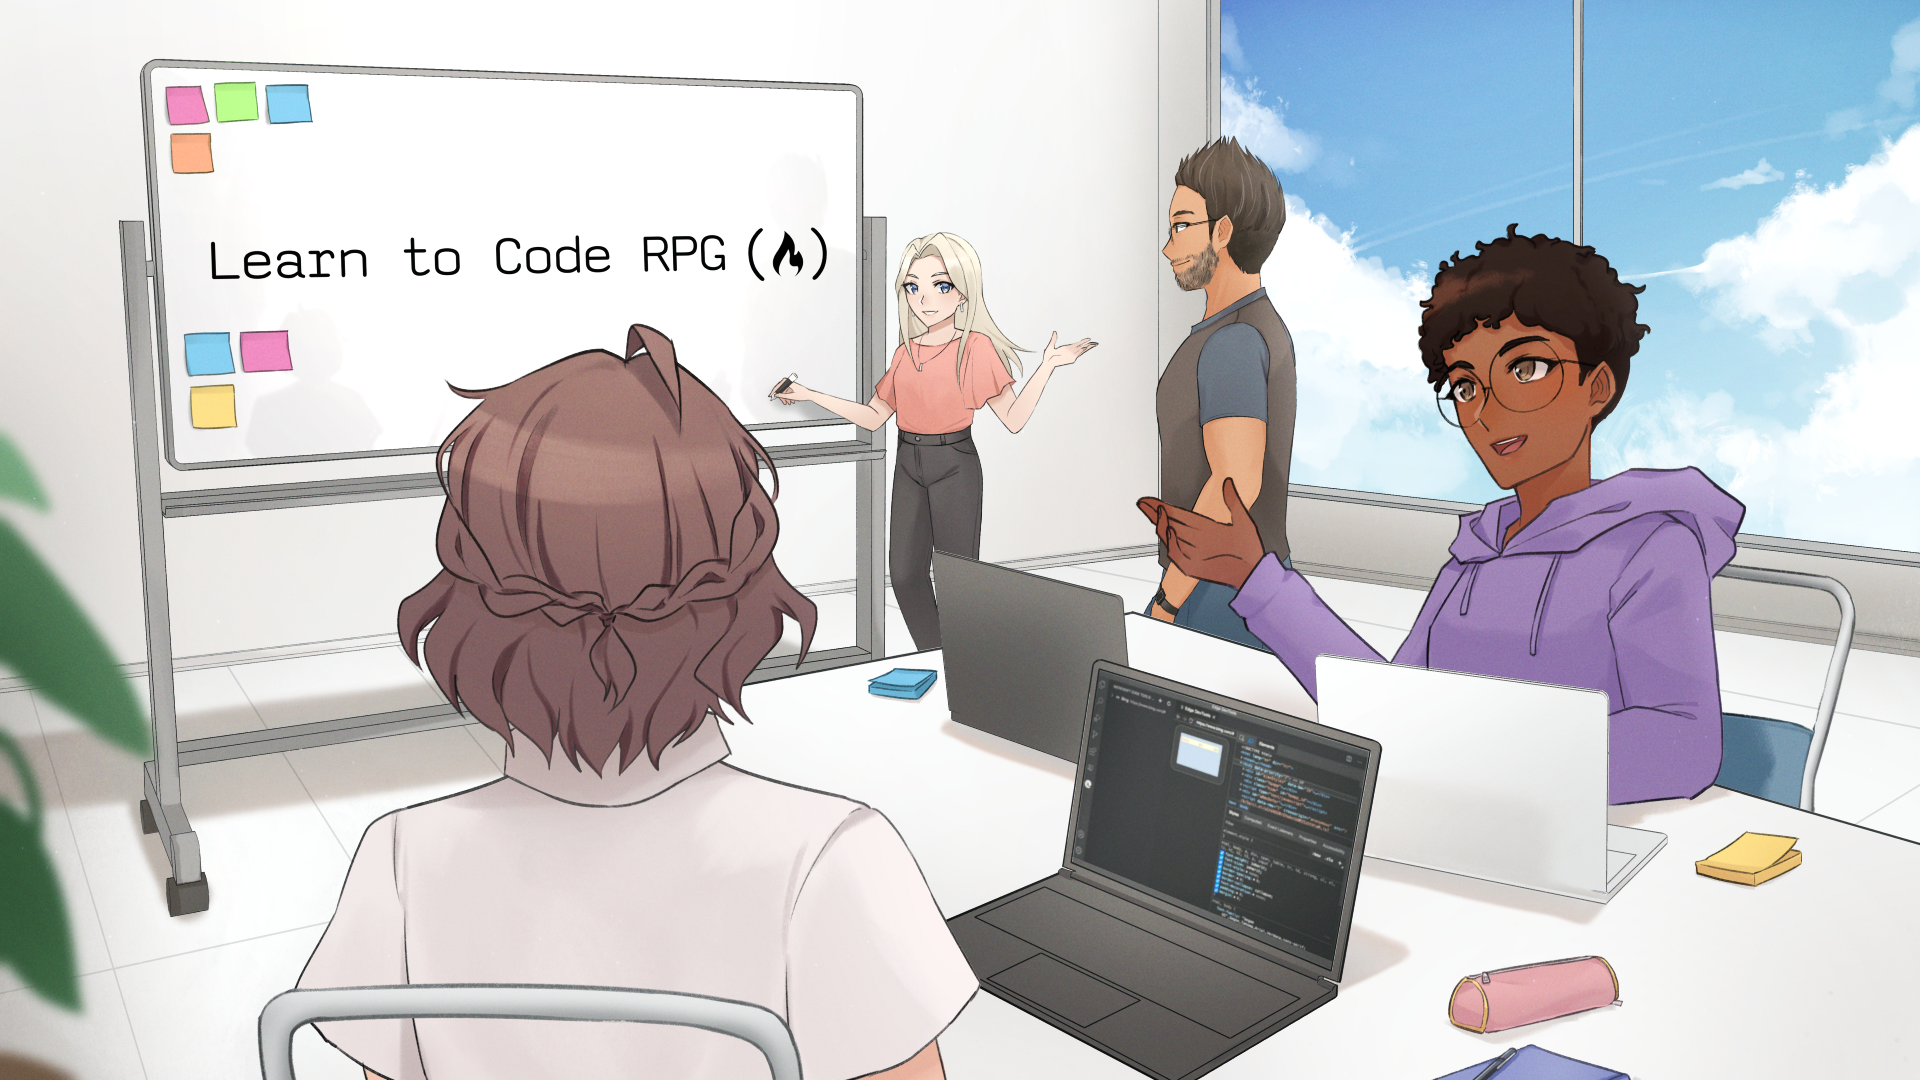 Learn to Code RPG – Press Kit